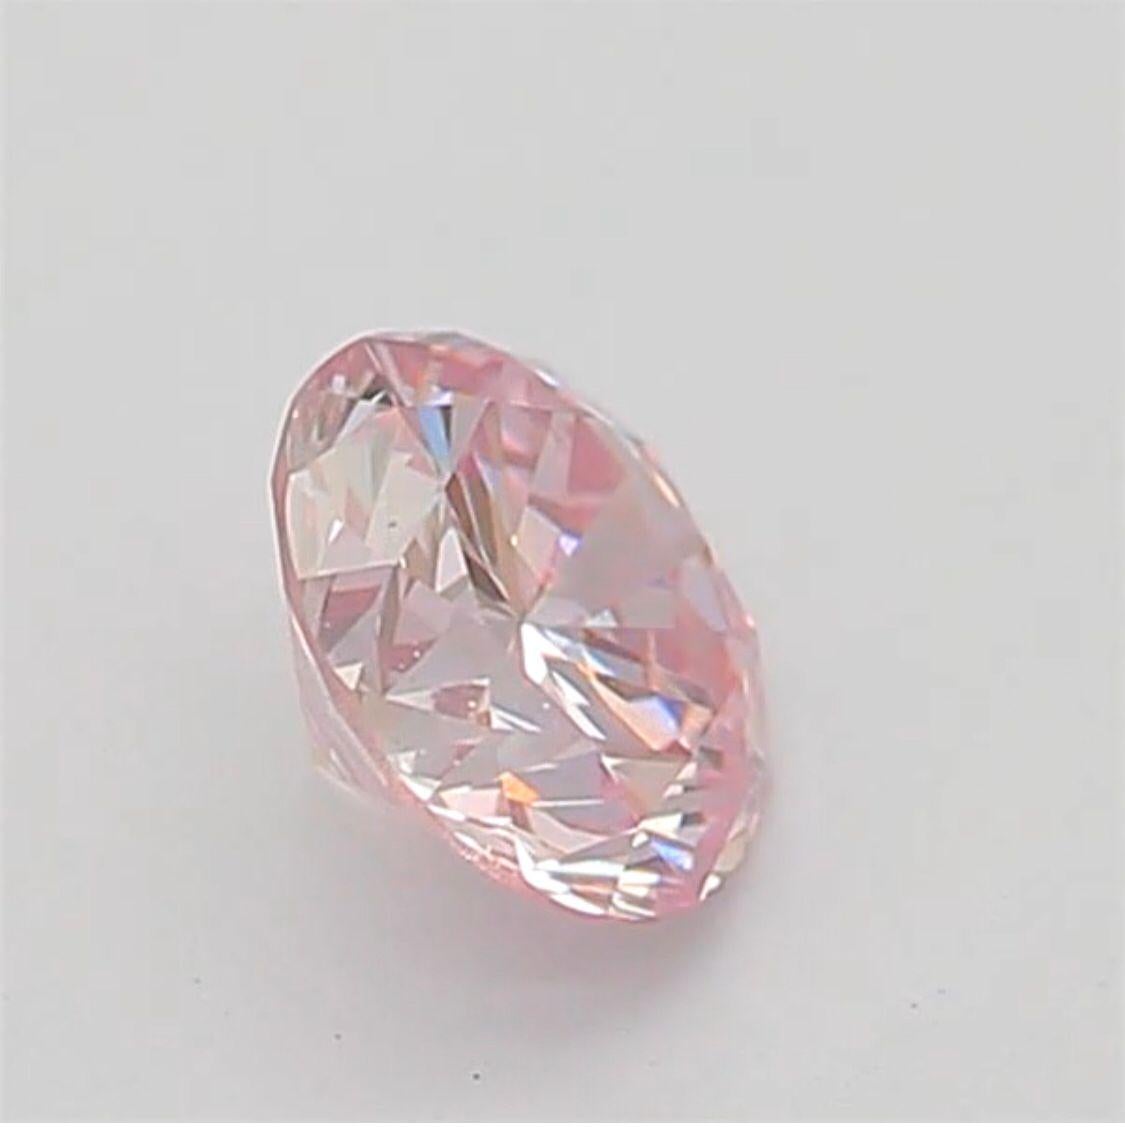 Women's or Men's 0.20 Carat Very Light Pink Round Shaped Diamond VS1 Clarity CGL Certified For Sale